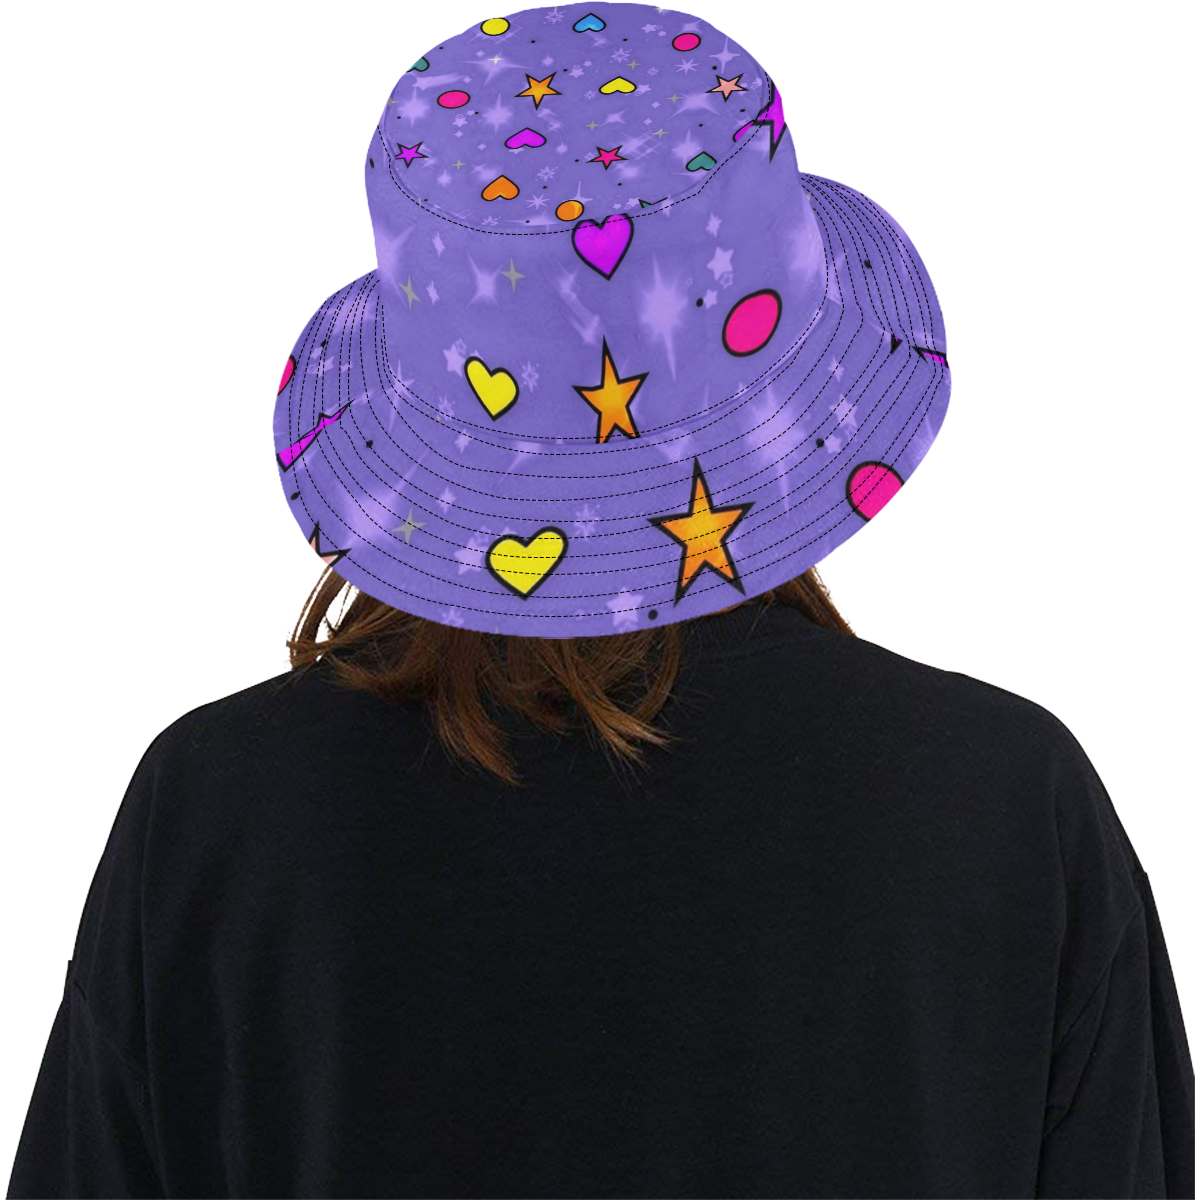 Popart by Nico Bielow All Over Print Bucket Hat